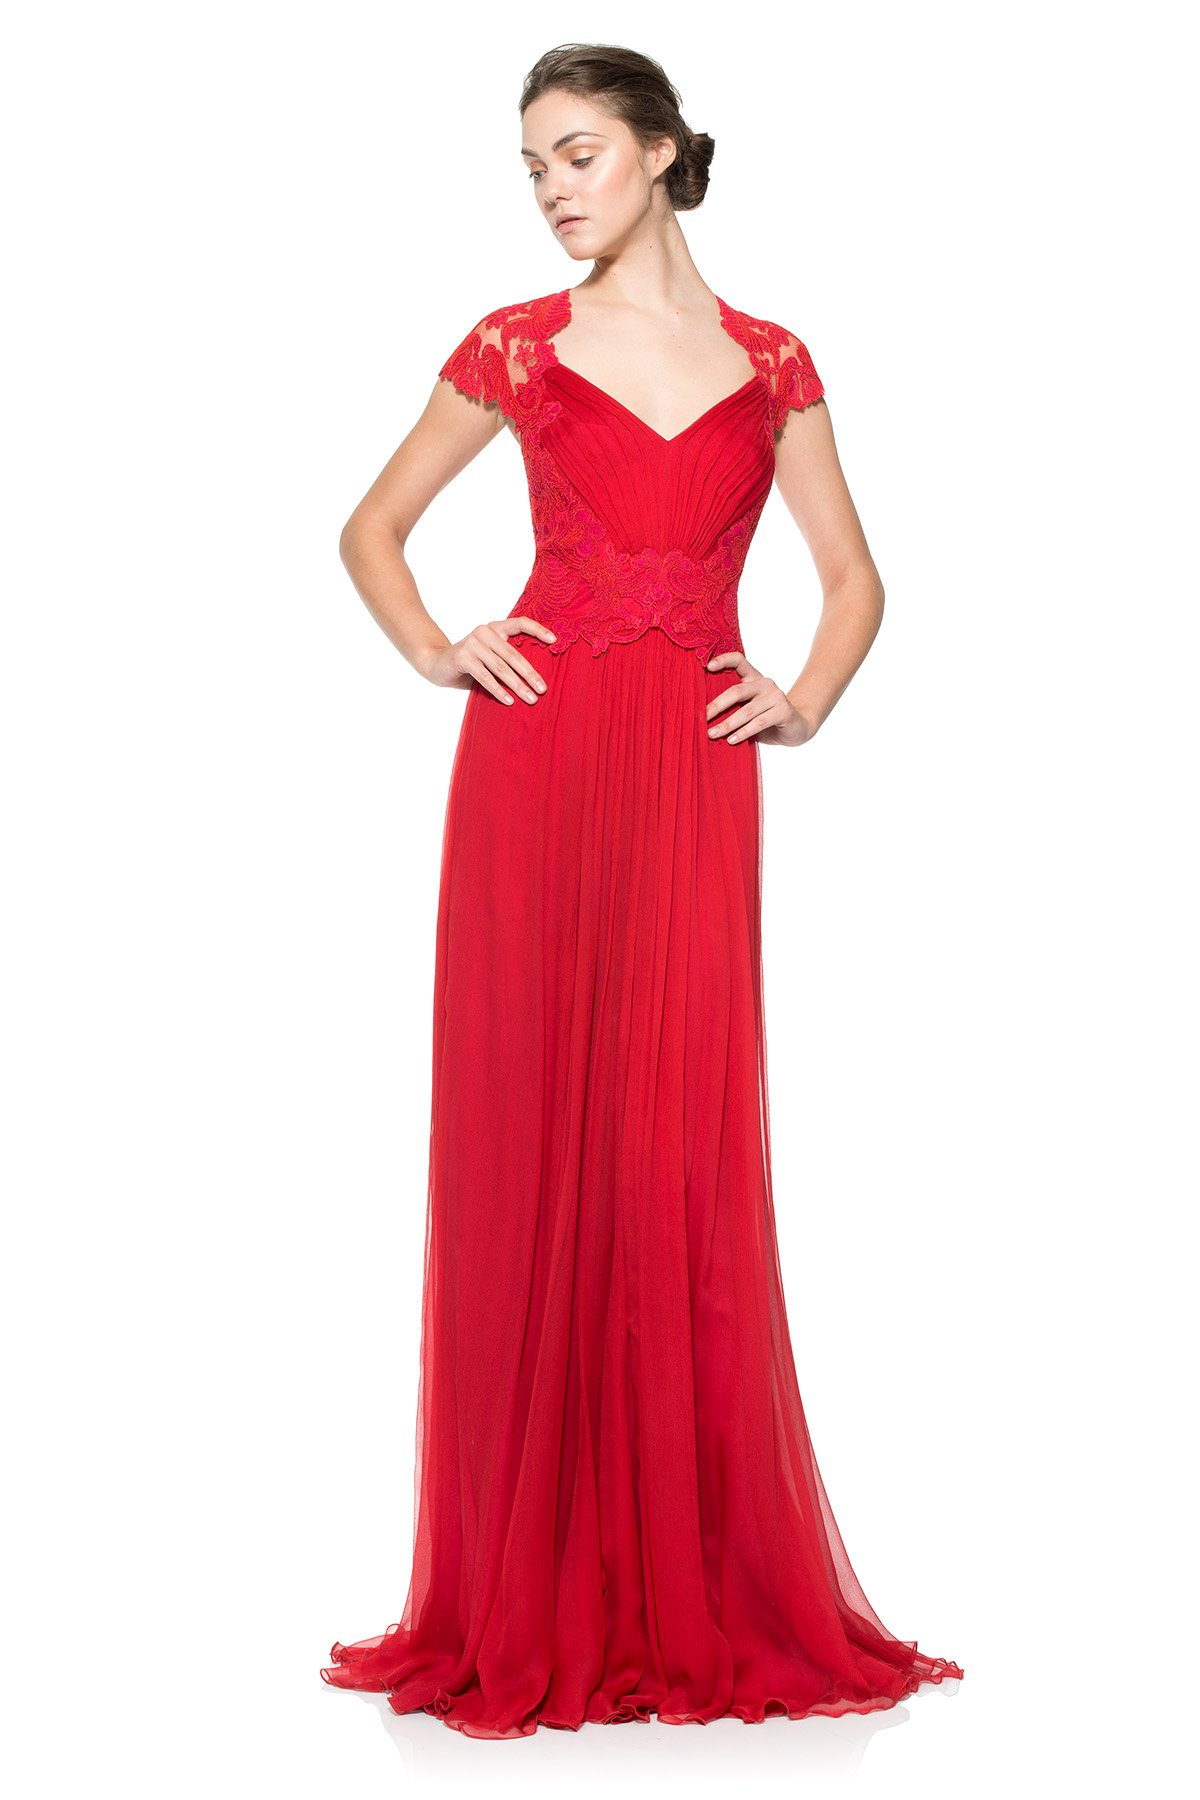 Corded Embroidery on Tulle Bodice Queen Ann Cap Sleeve Gown